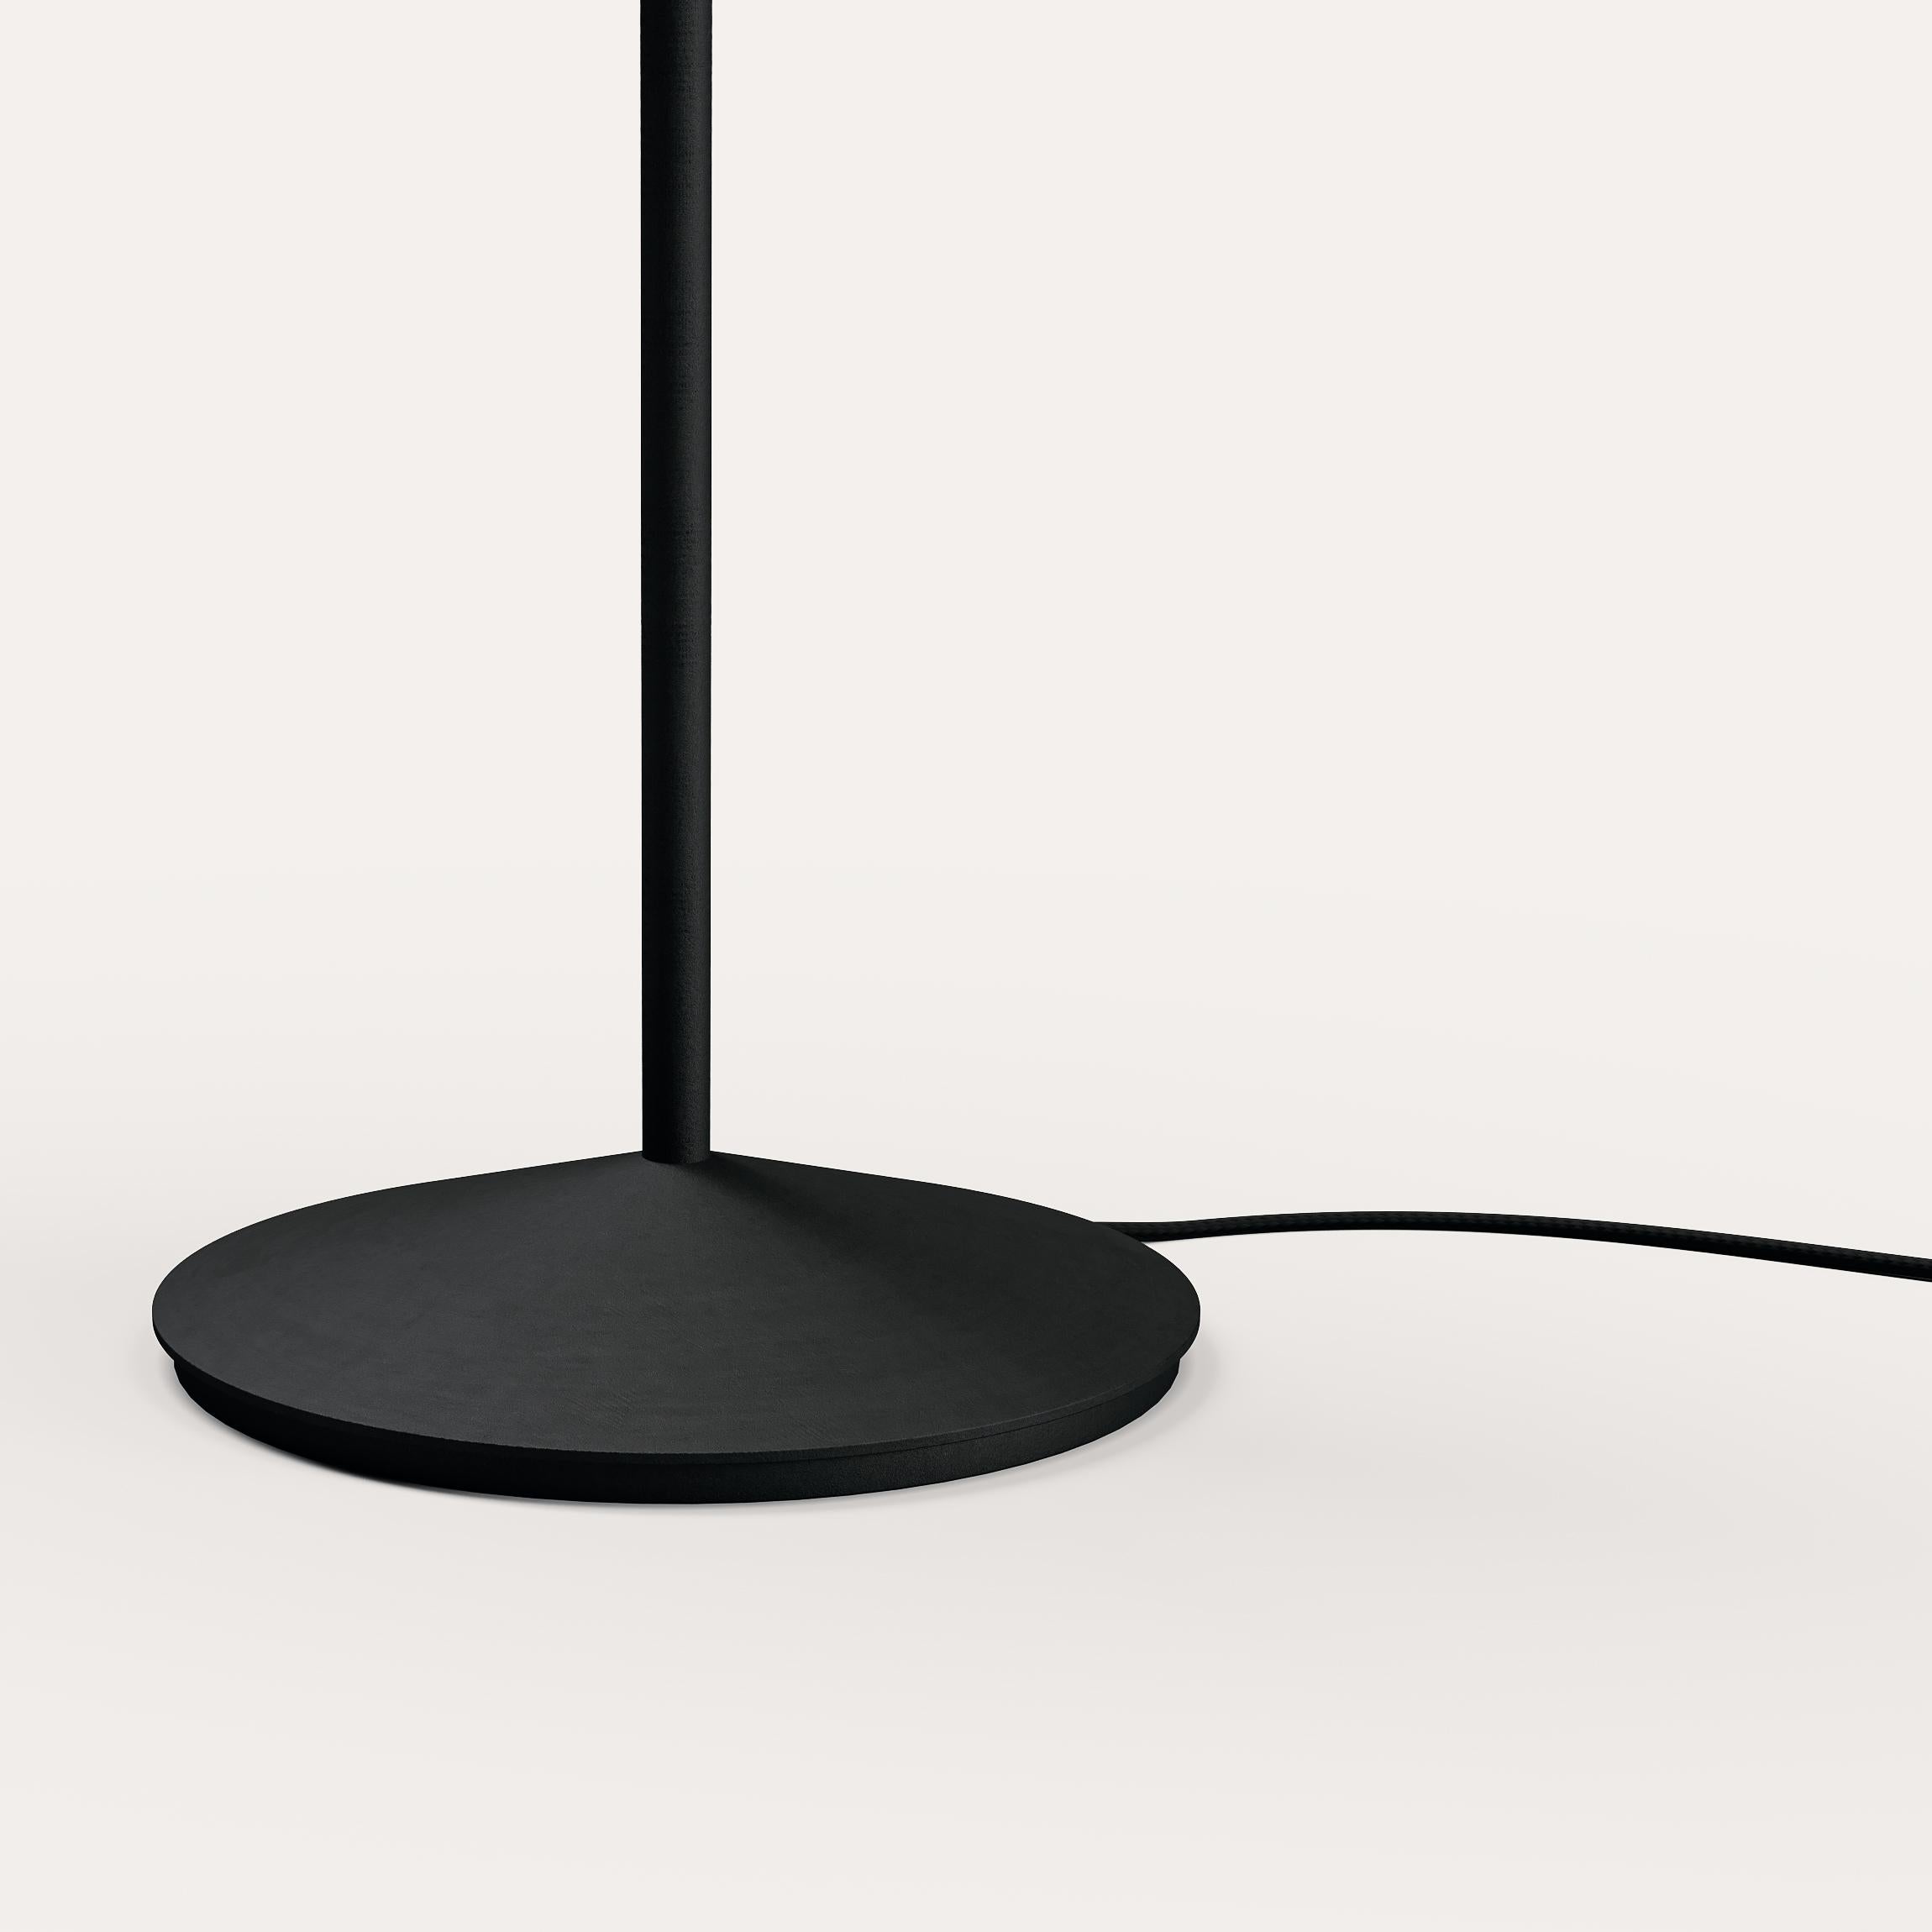 Circus Floor Lamp Designed by Corinna Warm for Warm Black/Bronze In New Condition For Sale In Santa Monica, CA